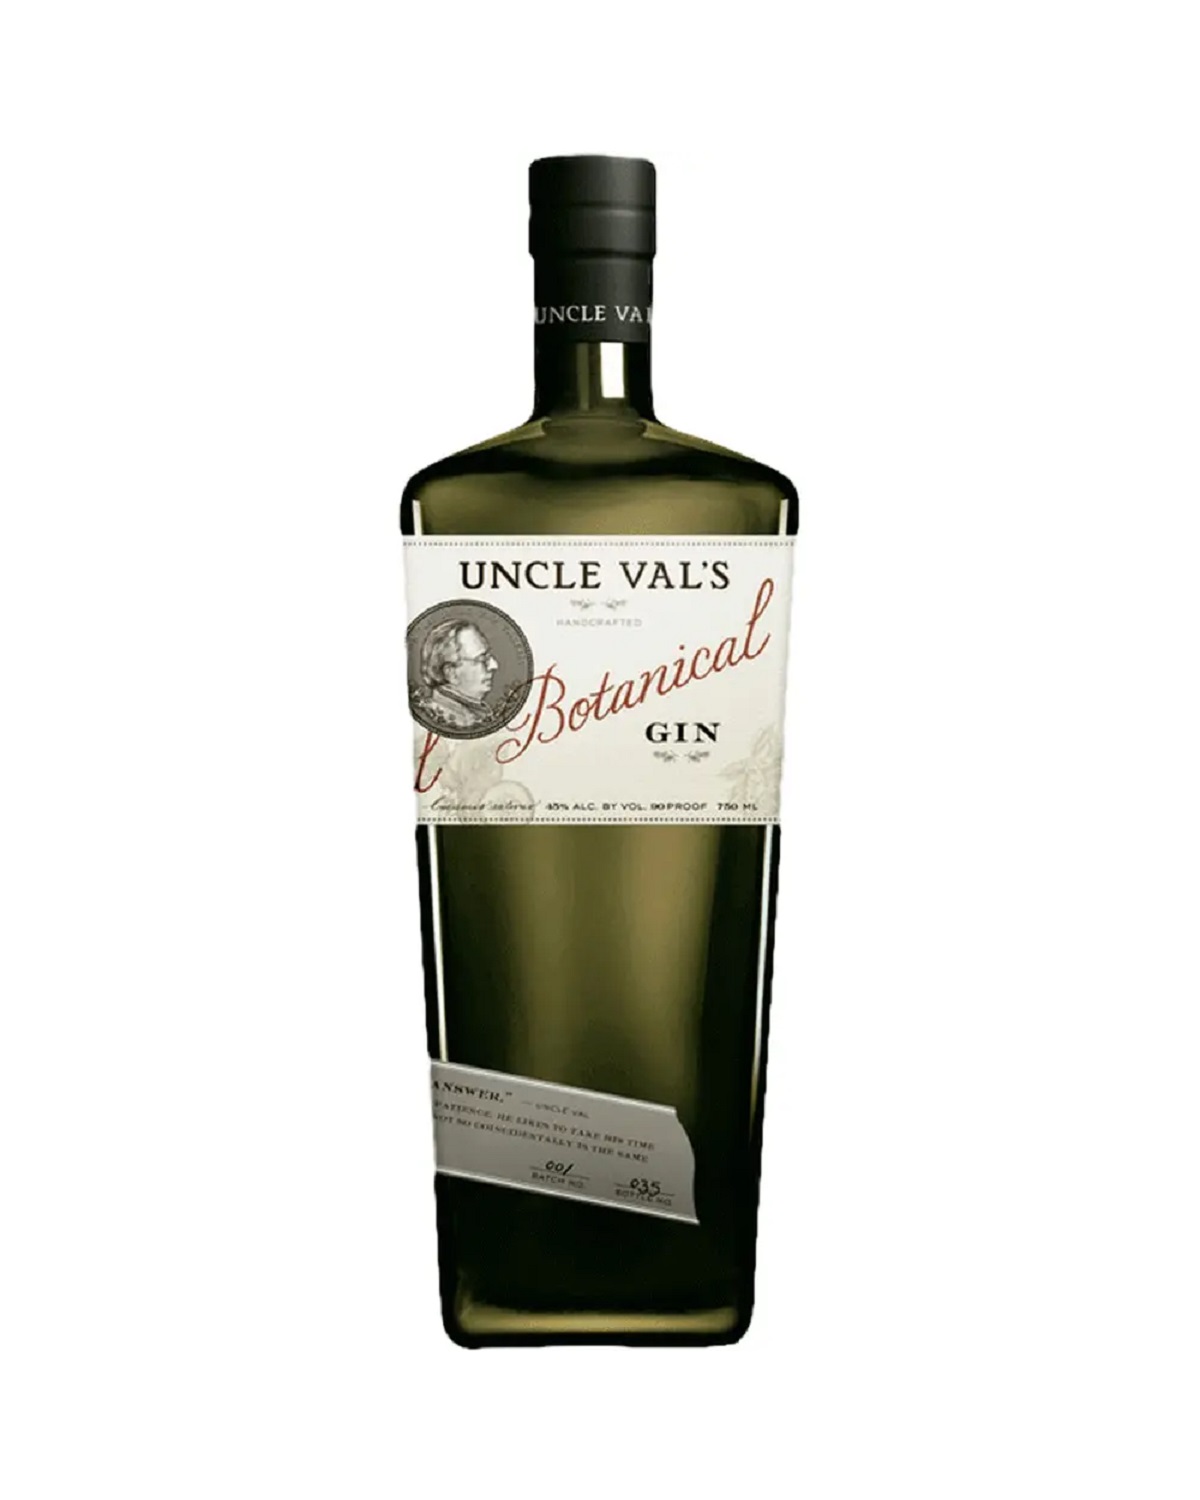 UNCLE VAL'S BOTANICAL GIN 750ML